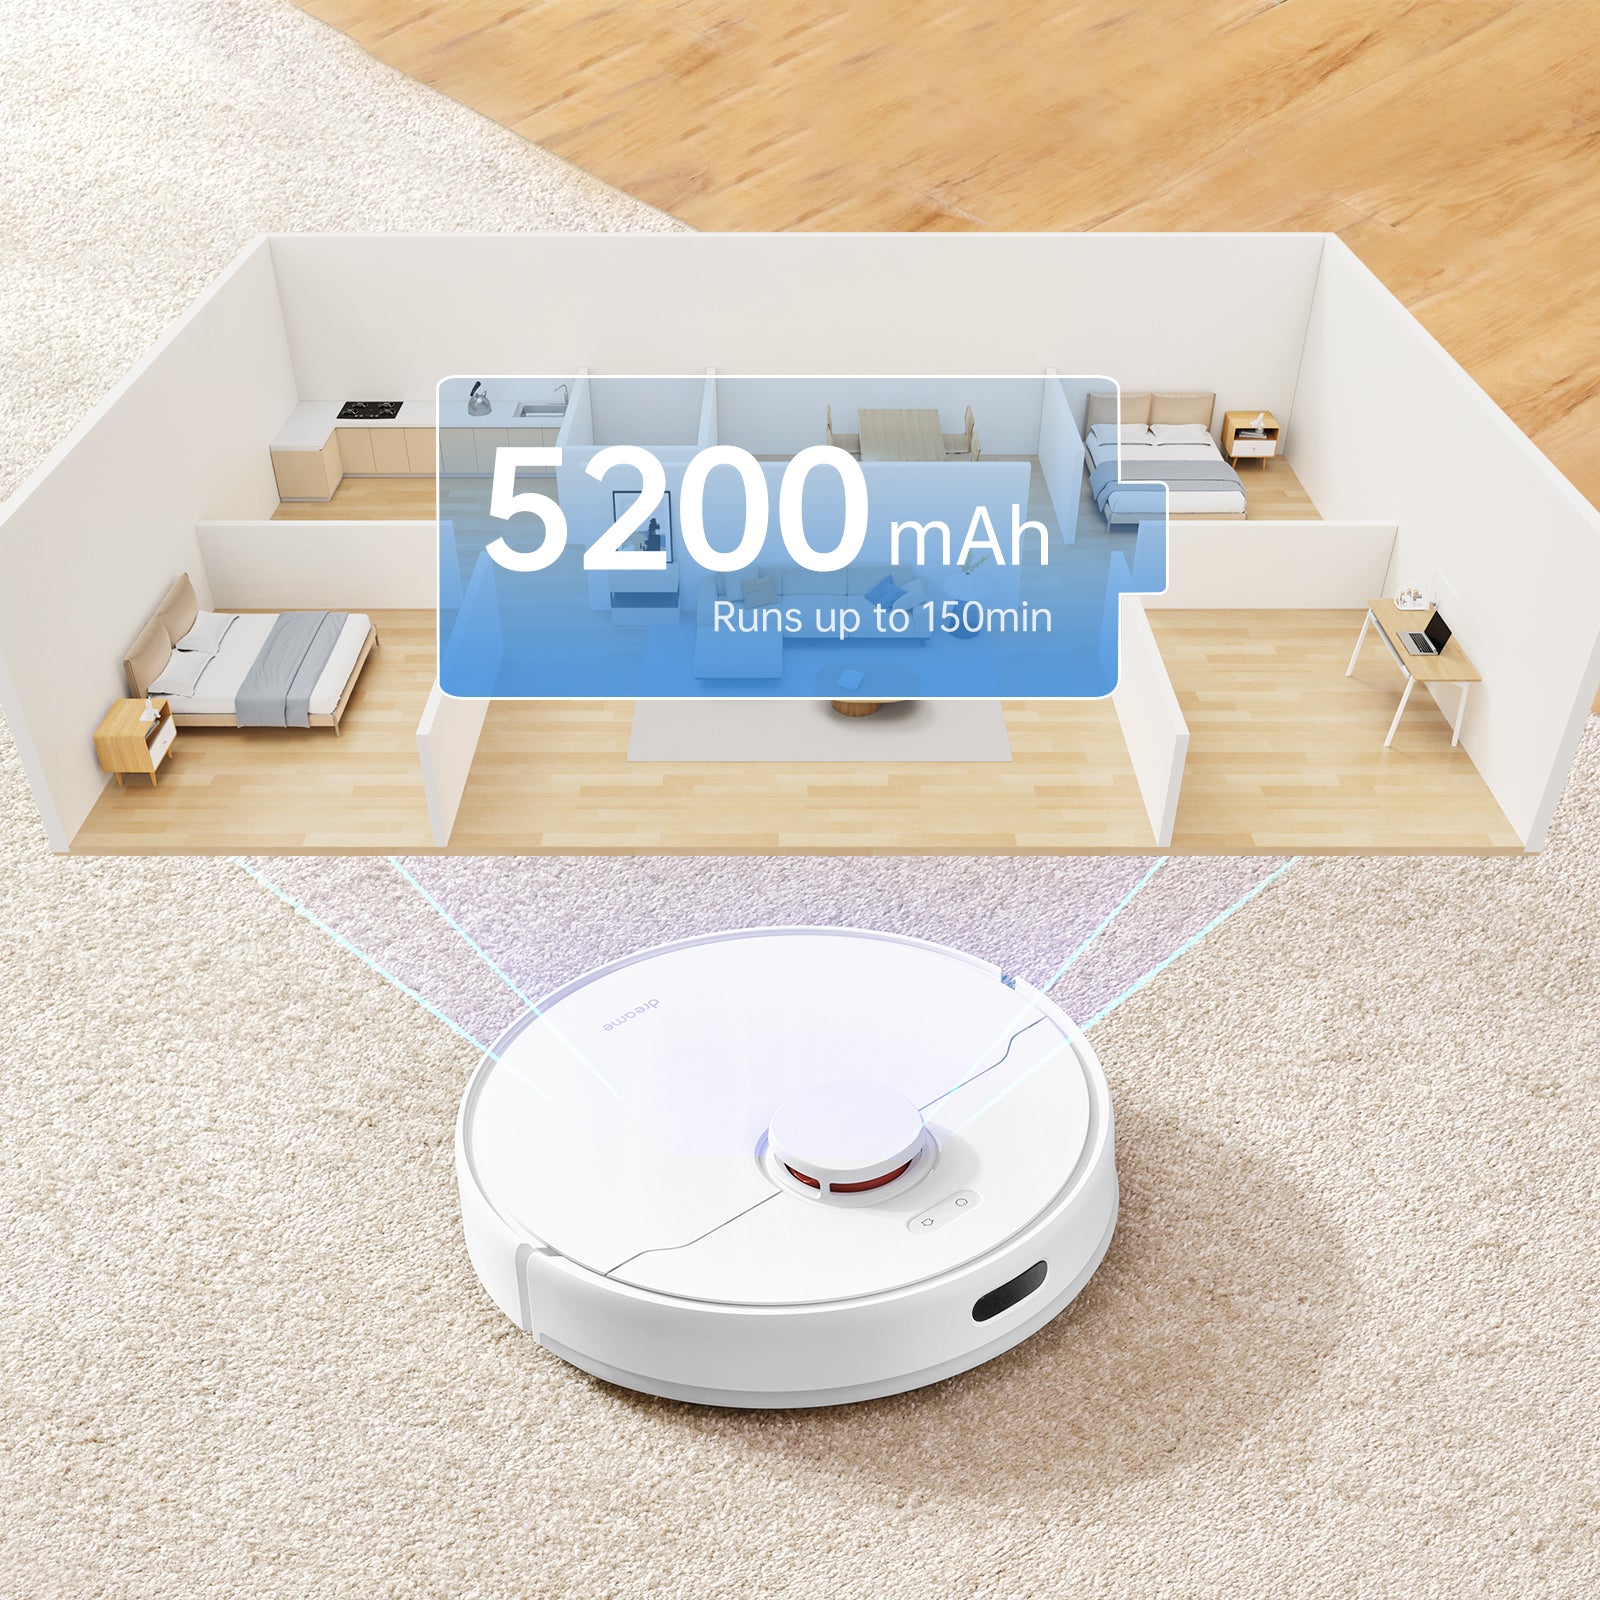 Dreame Bot D10 Plus Review: Dreame's CHEAPEST SELF-EMPTYING ROBOT VACUUM 